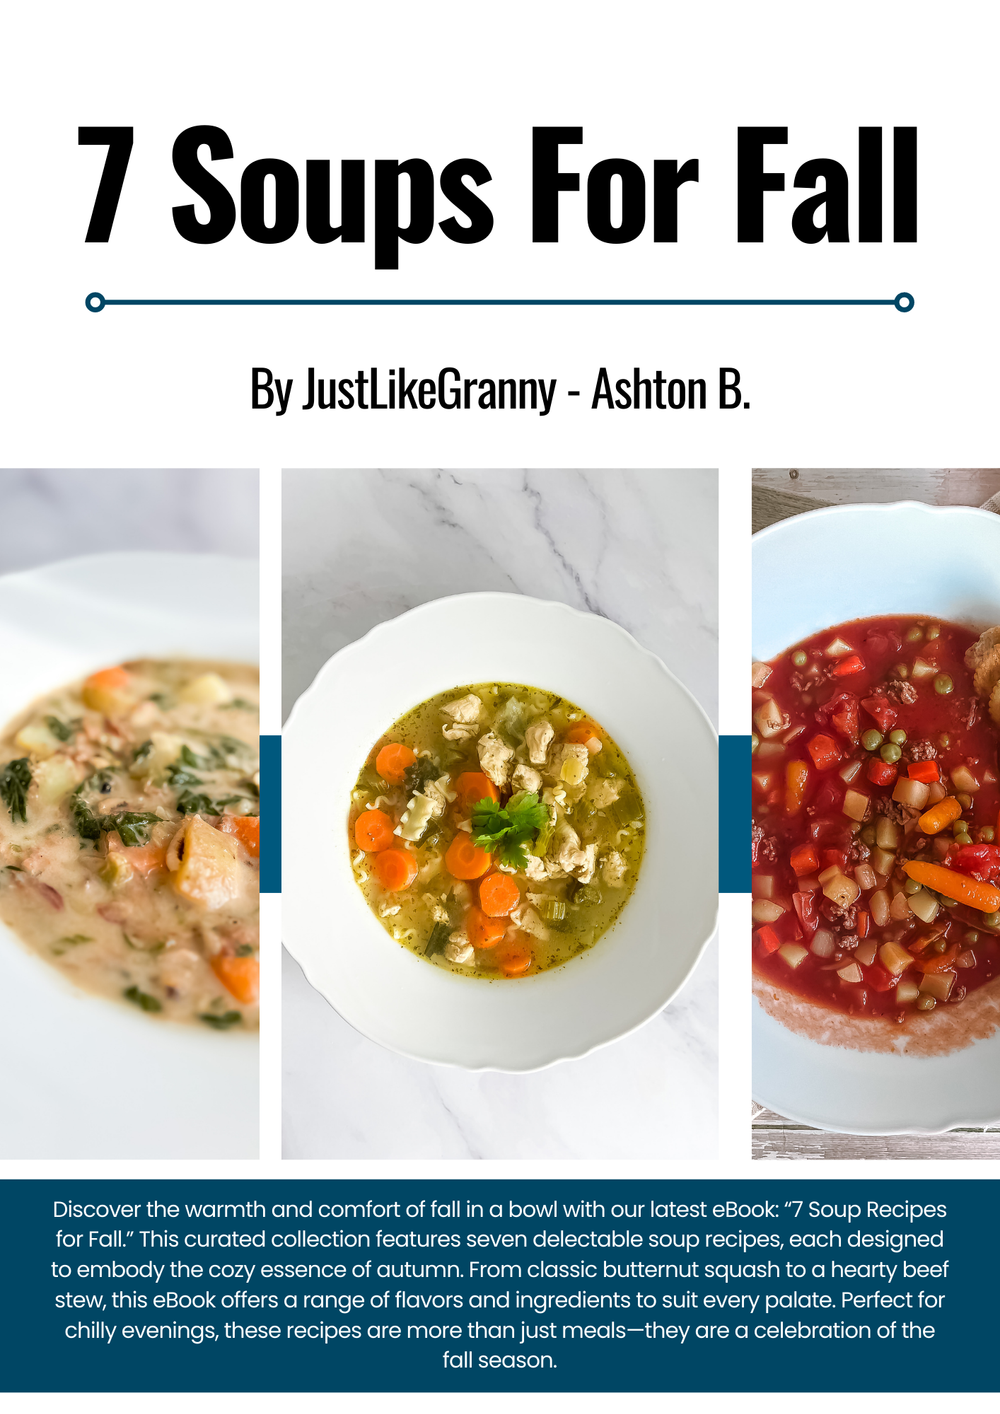 9 One-Pan Meals Recipe eBook by JustLikeGranny A.K.A. Ashton B., Just Like  Granny